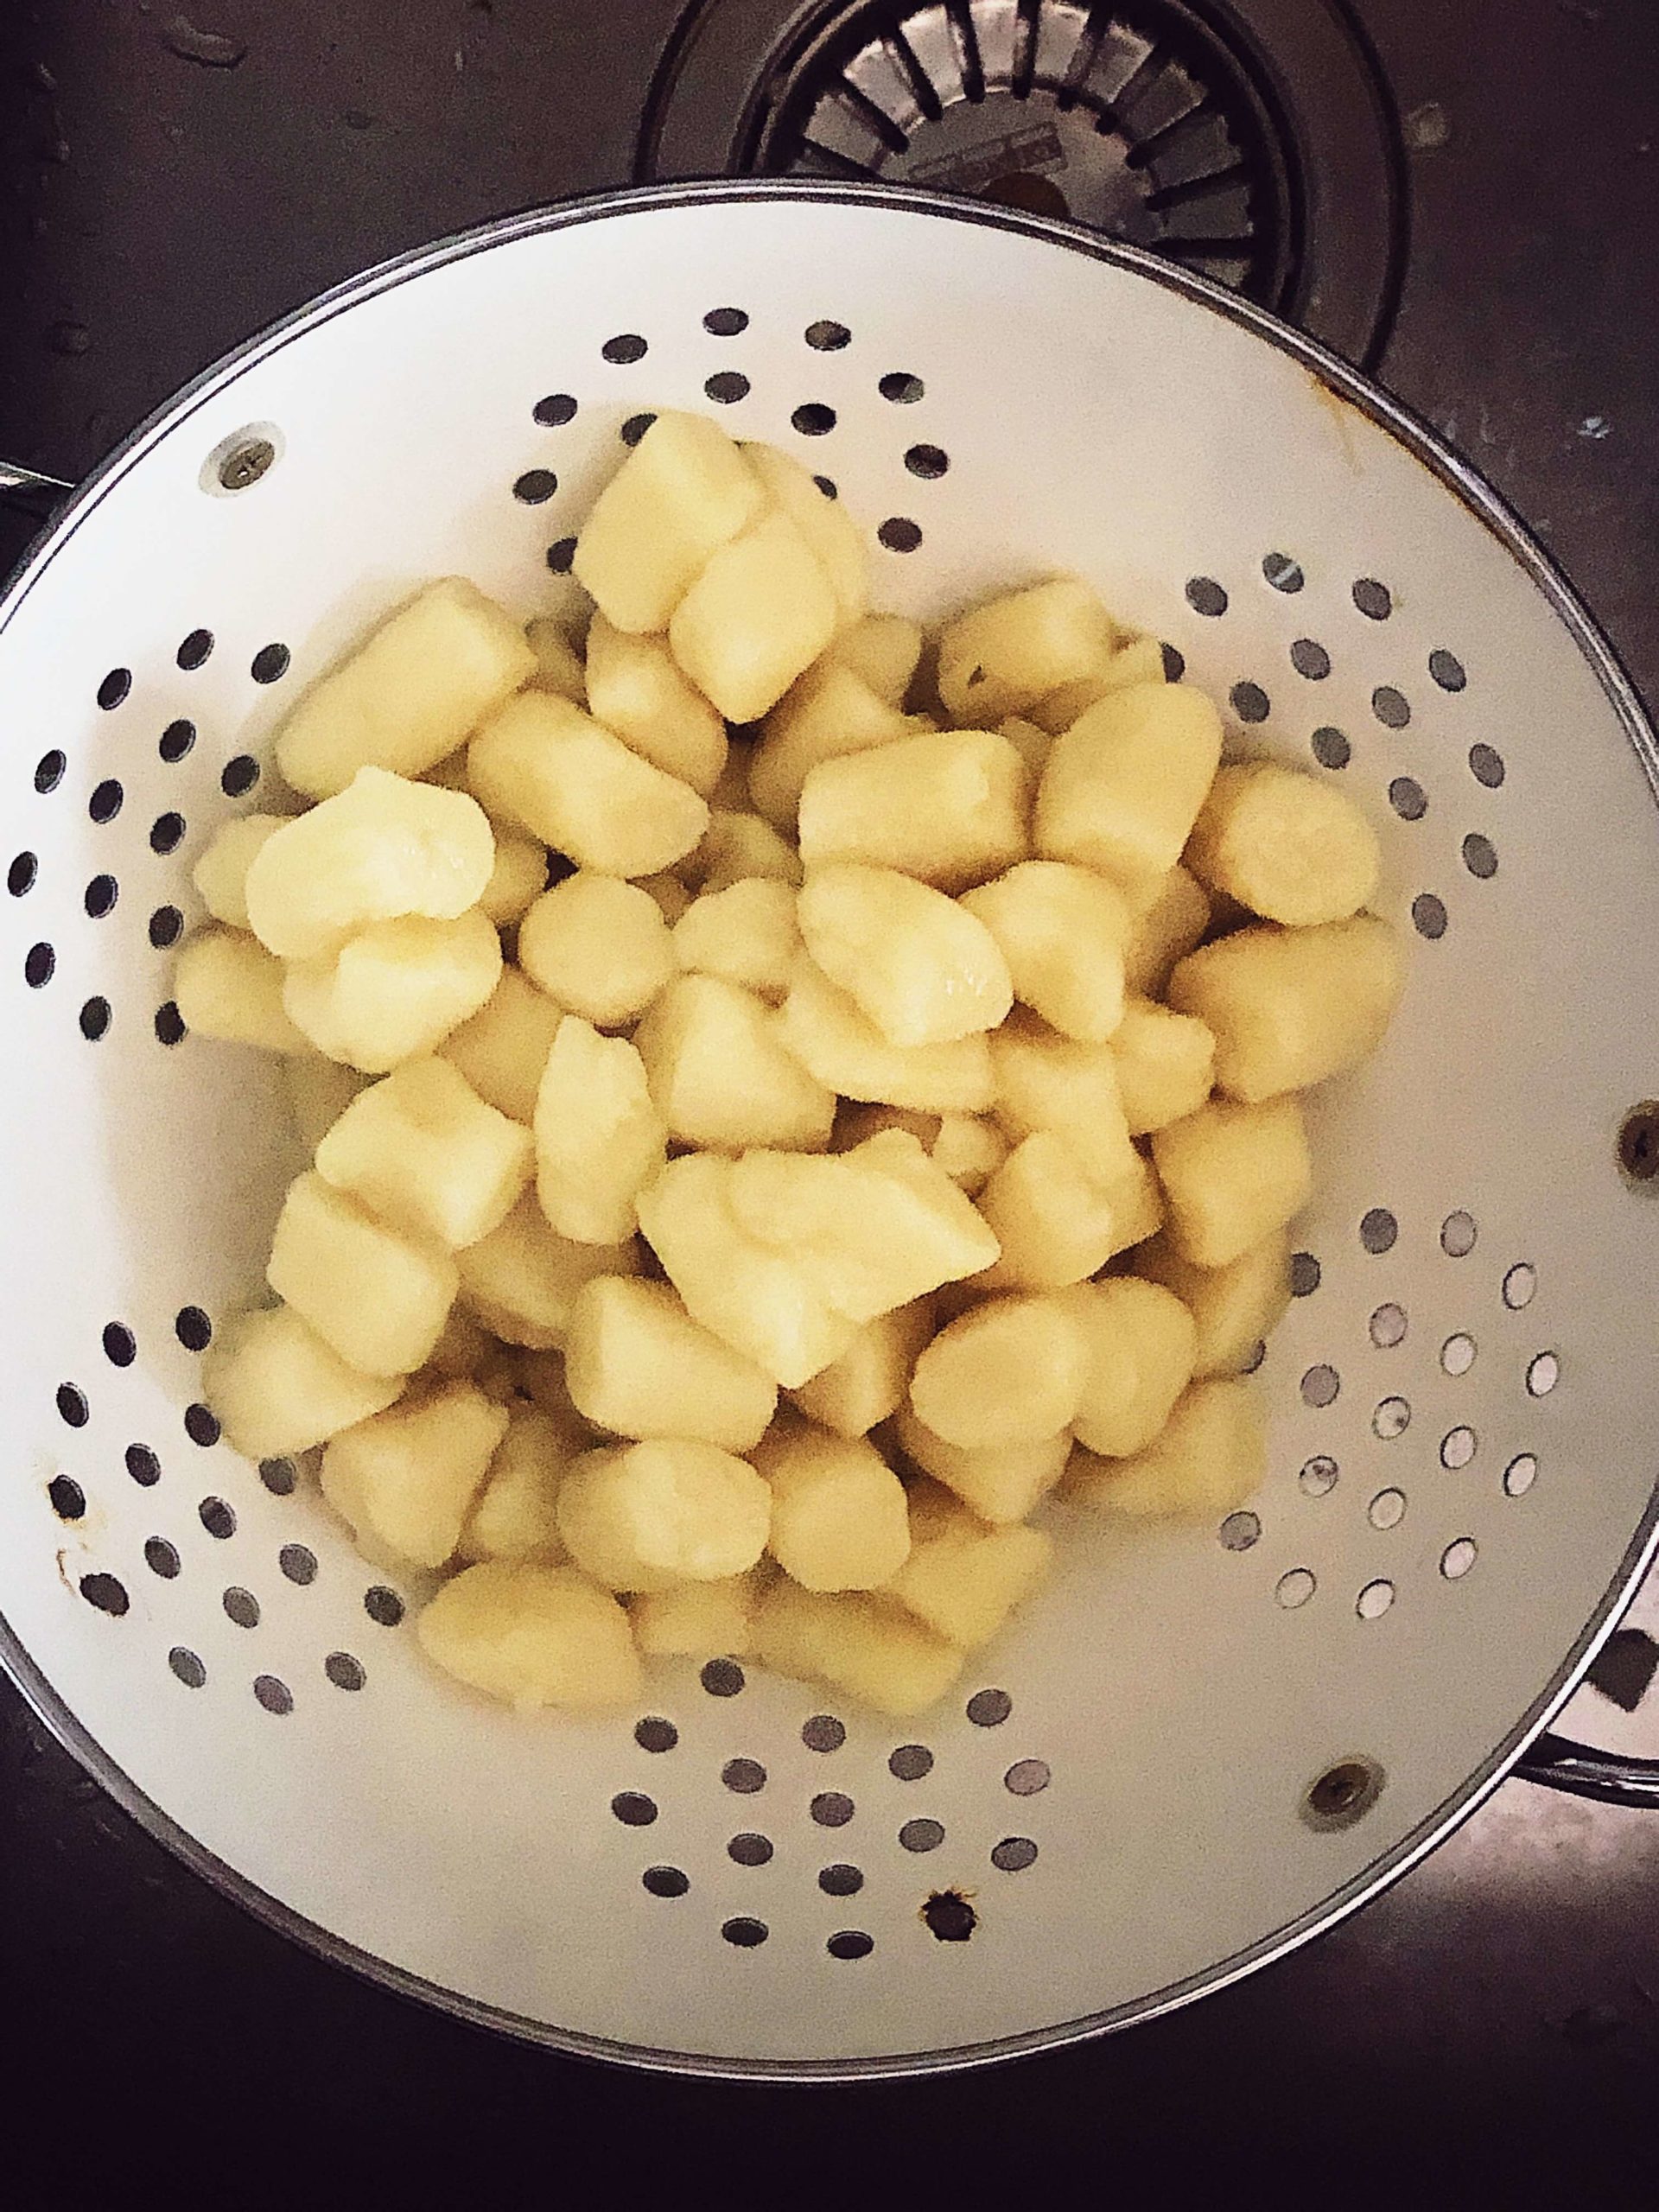 How to make and cook authentic Italian gnocchi